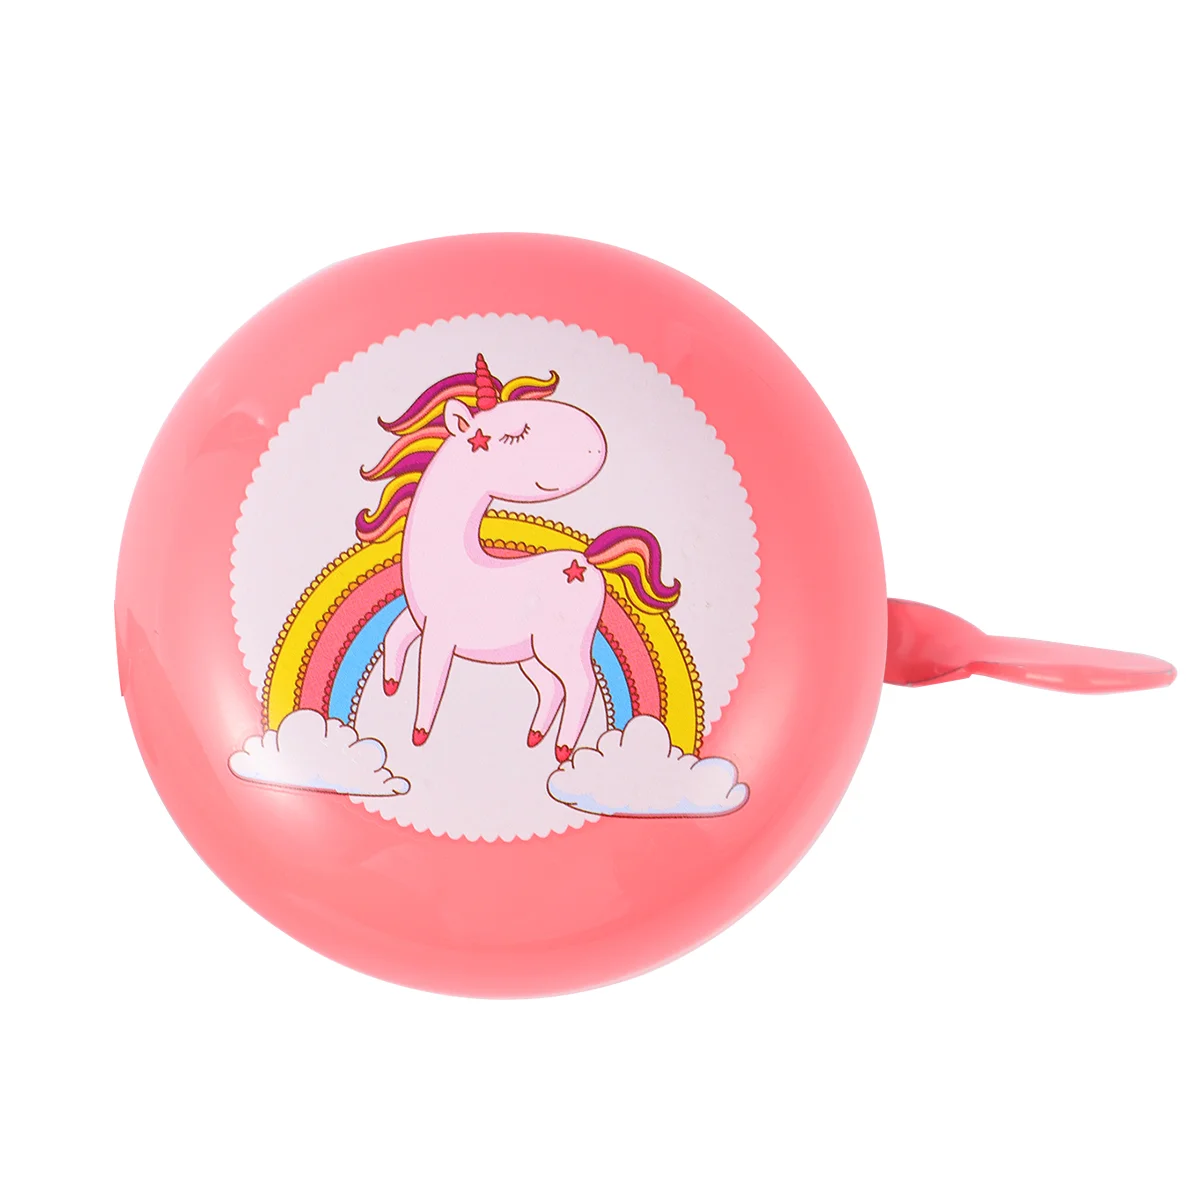 

Bicycle Bell Decor Bike Bells Printed Unicorn Bike Bells Crisp Sound Ring Bell For Scooter Tricycle Children DIY Adornment